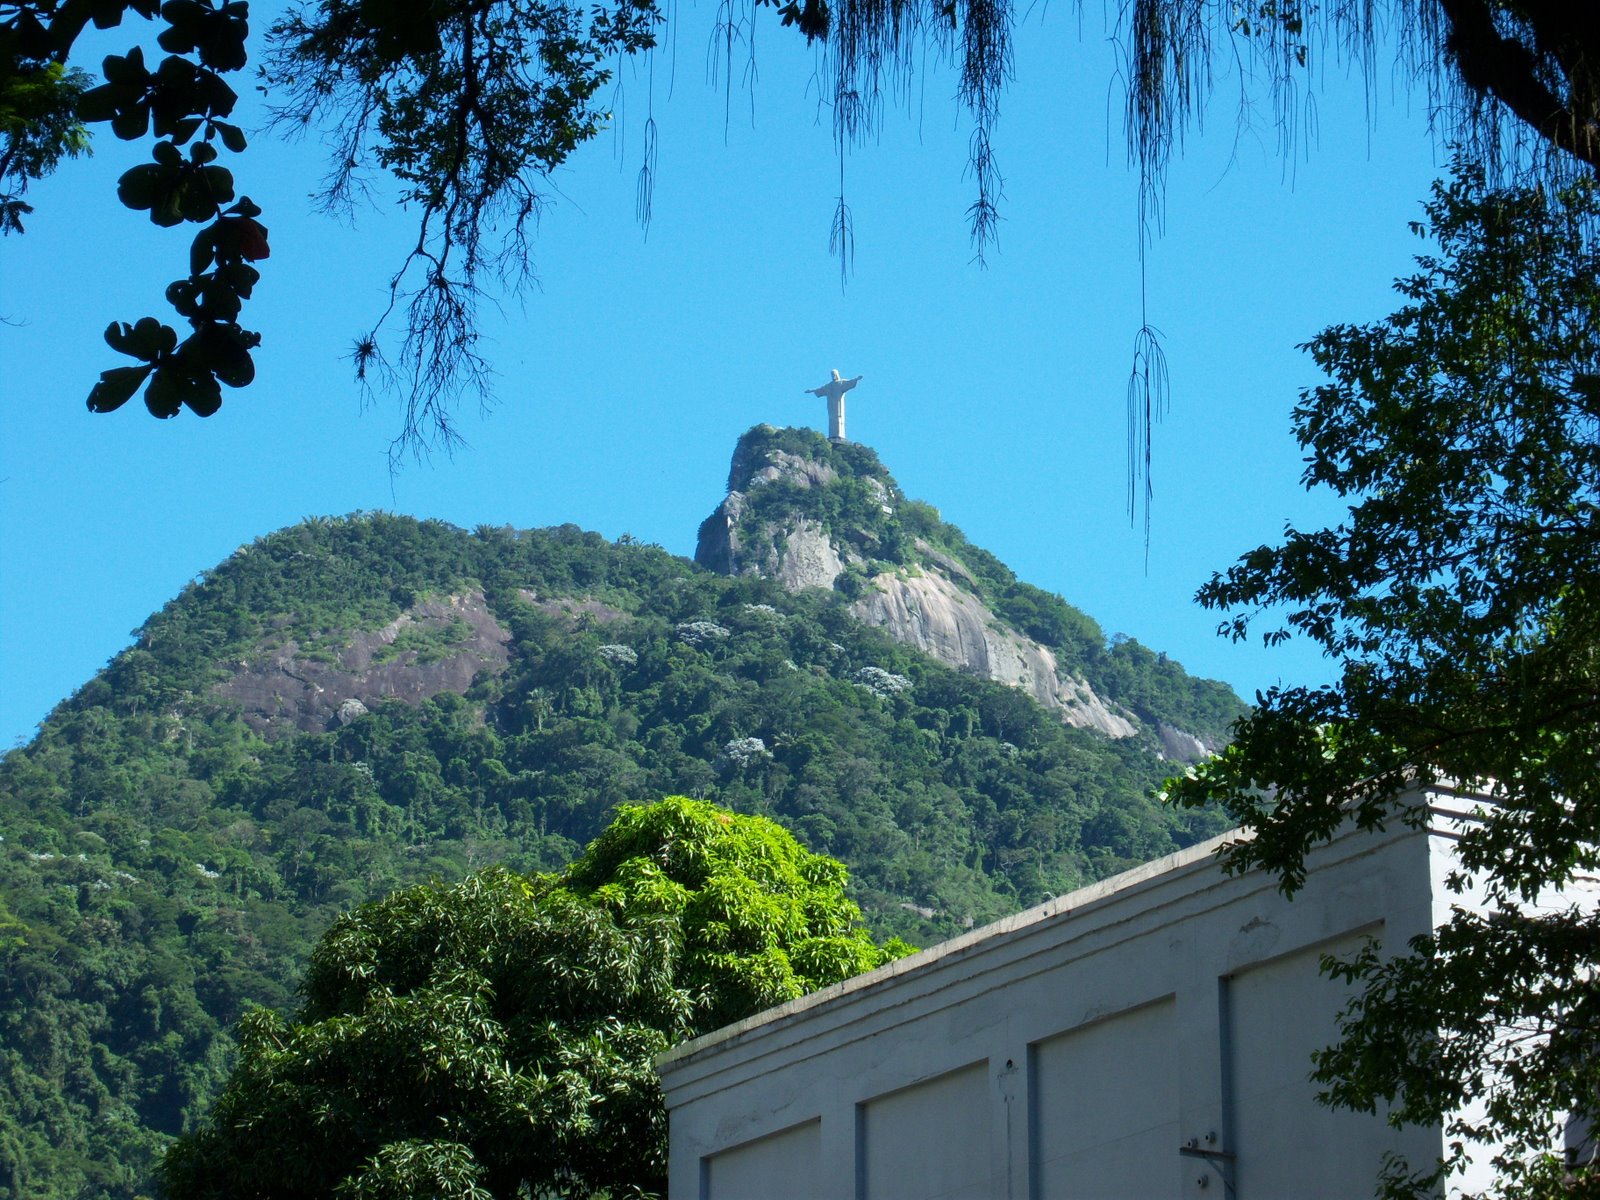 [Christ+the+Redeemer+statue+trhough+trees]